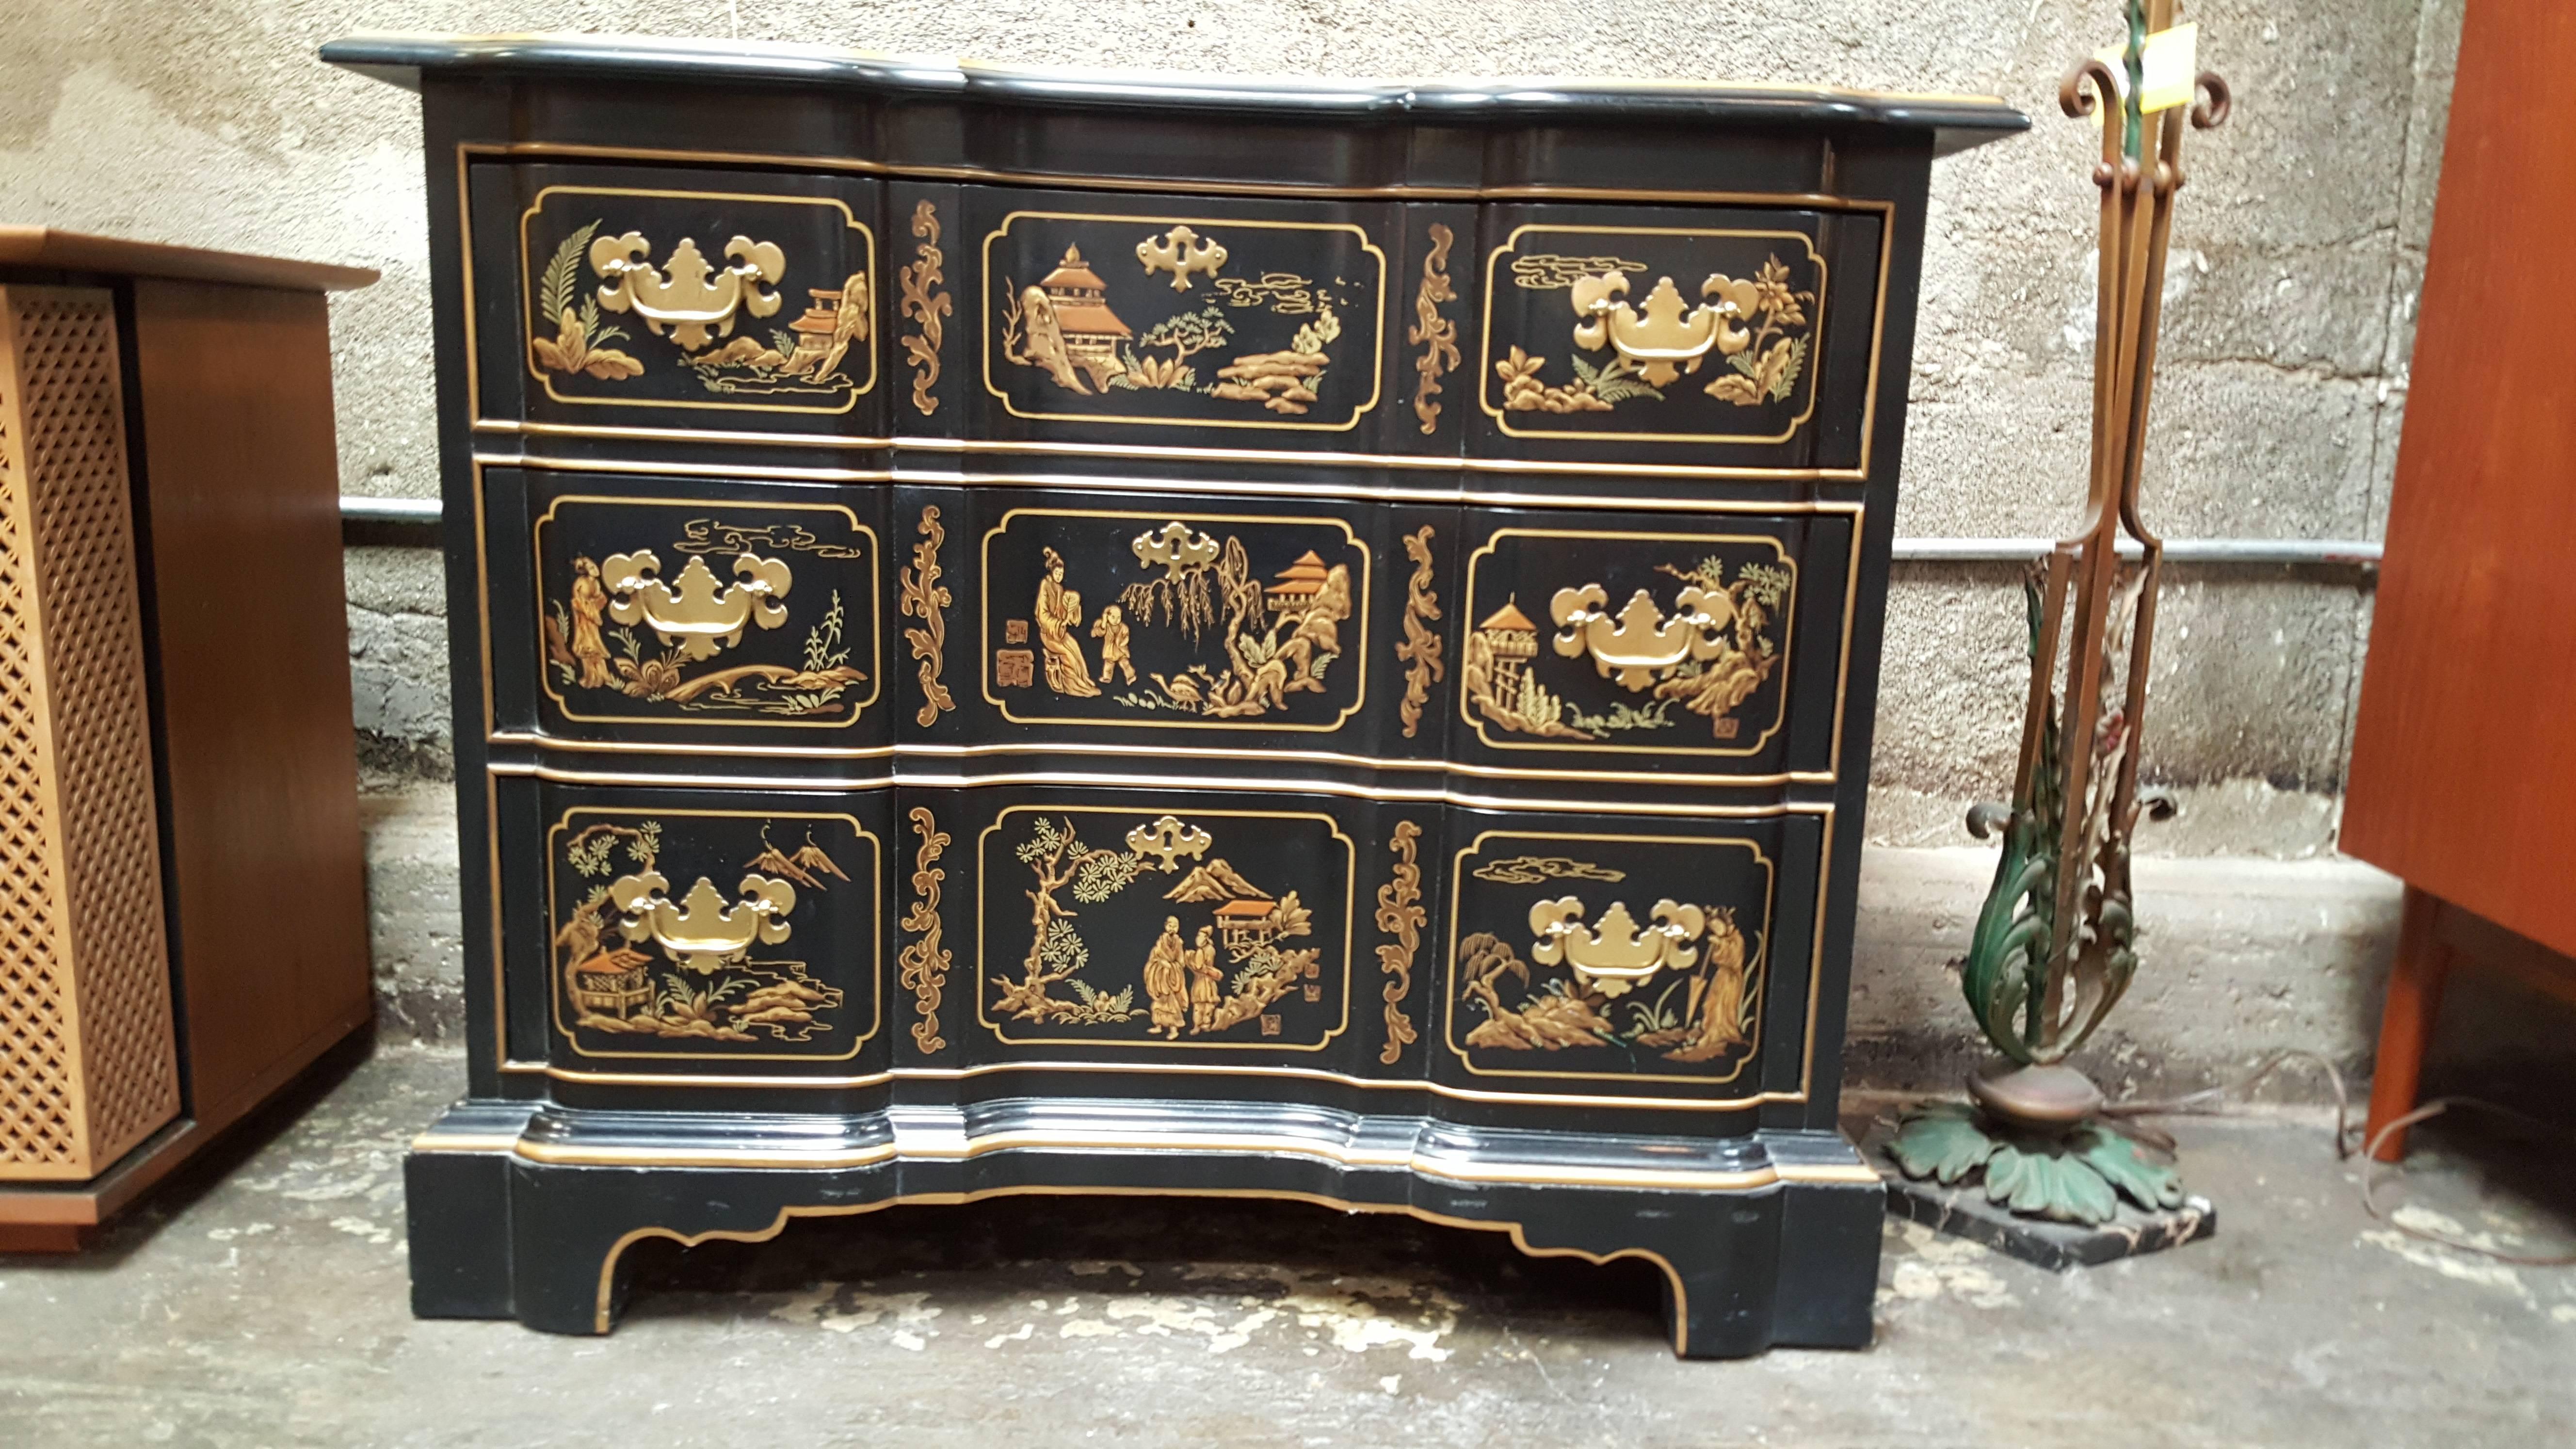 A Chippendale style blocked-front three drawer chinoiserie dresser by Drexel Furniture. Quality materials and craftsmanship with solid brass pulls and dovetail construction.